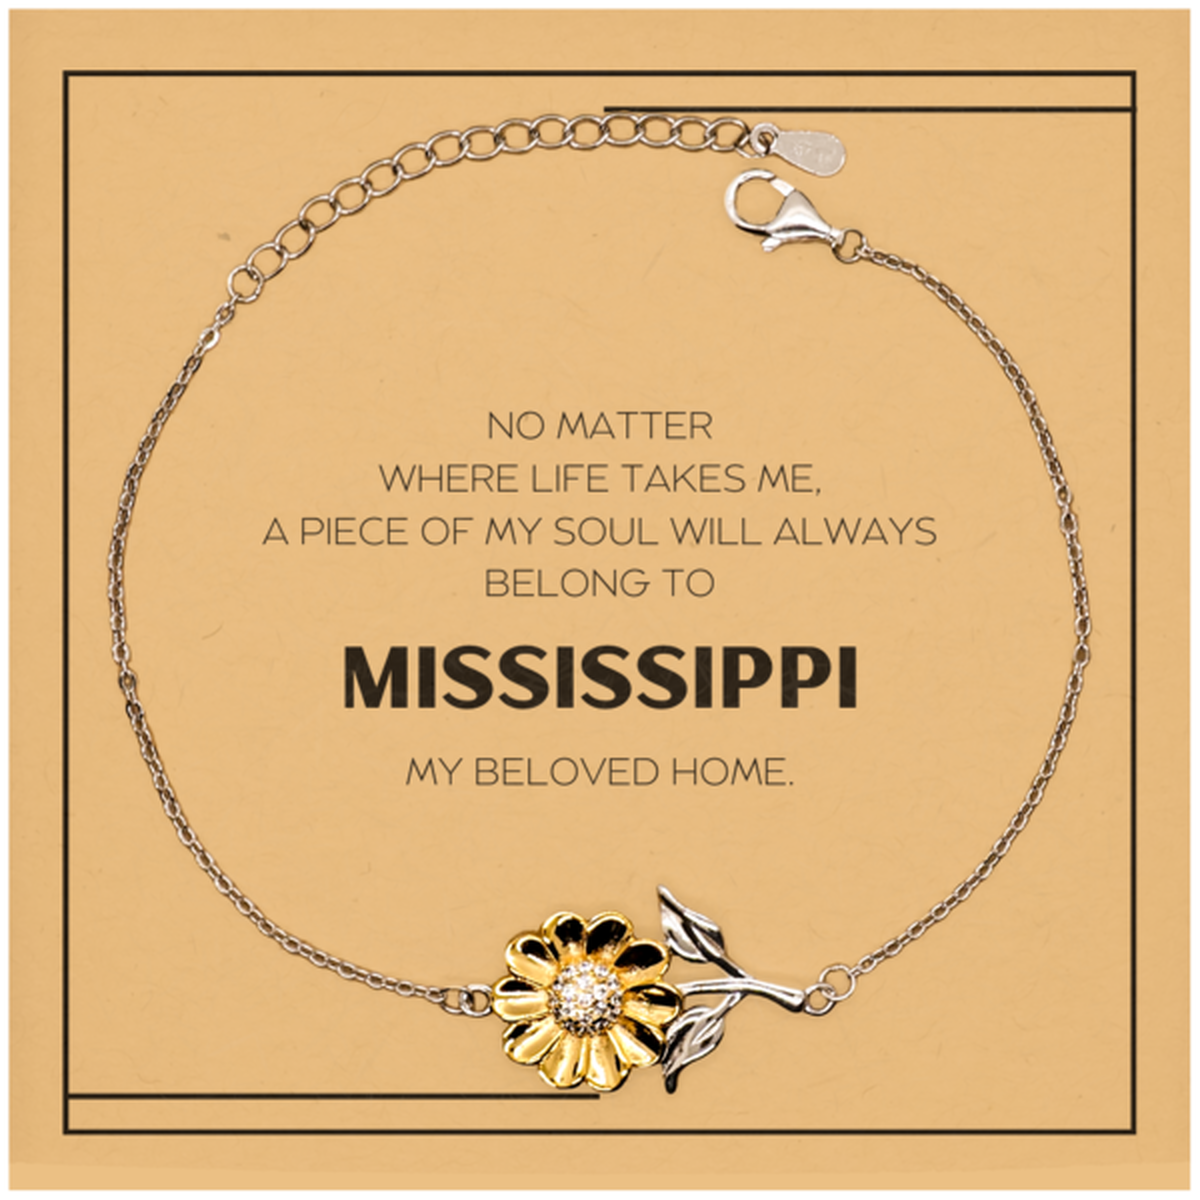 Love Mississippi State Gifts, My soul will always belong to Mississippi, Proud Sunflower Bracelet, Birthday Christmas Unique Gifts For Mississippi Men, Women, Friends